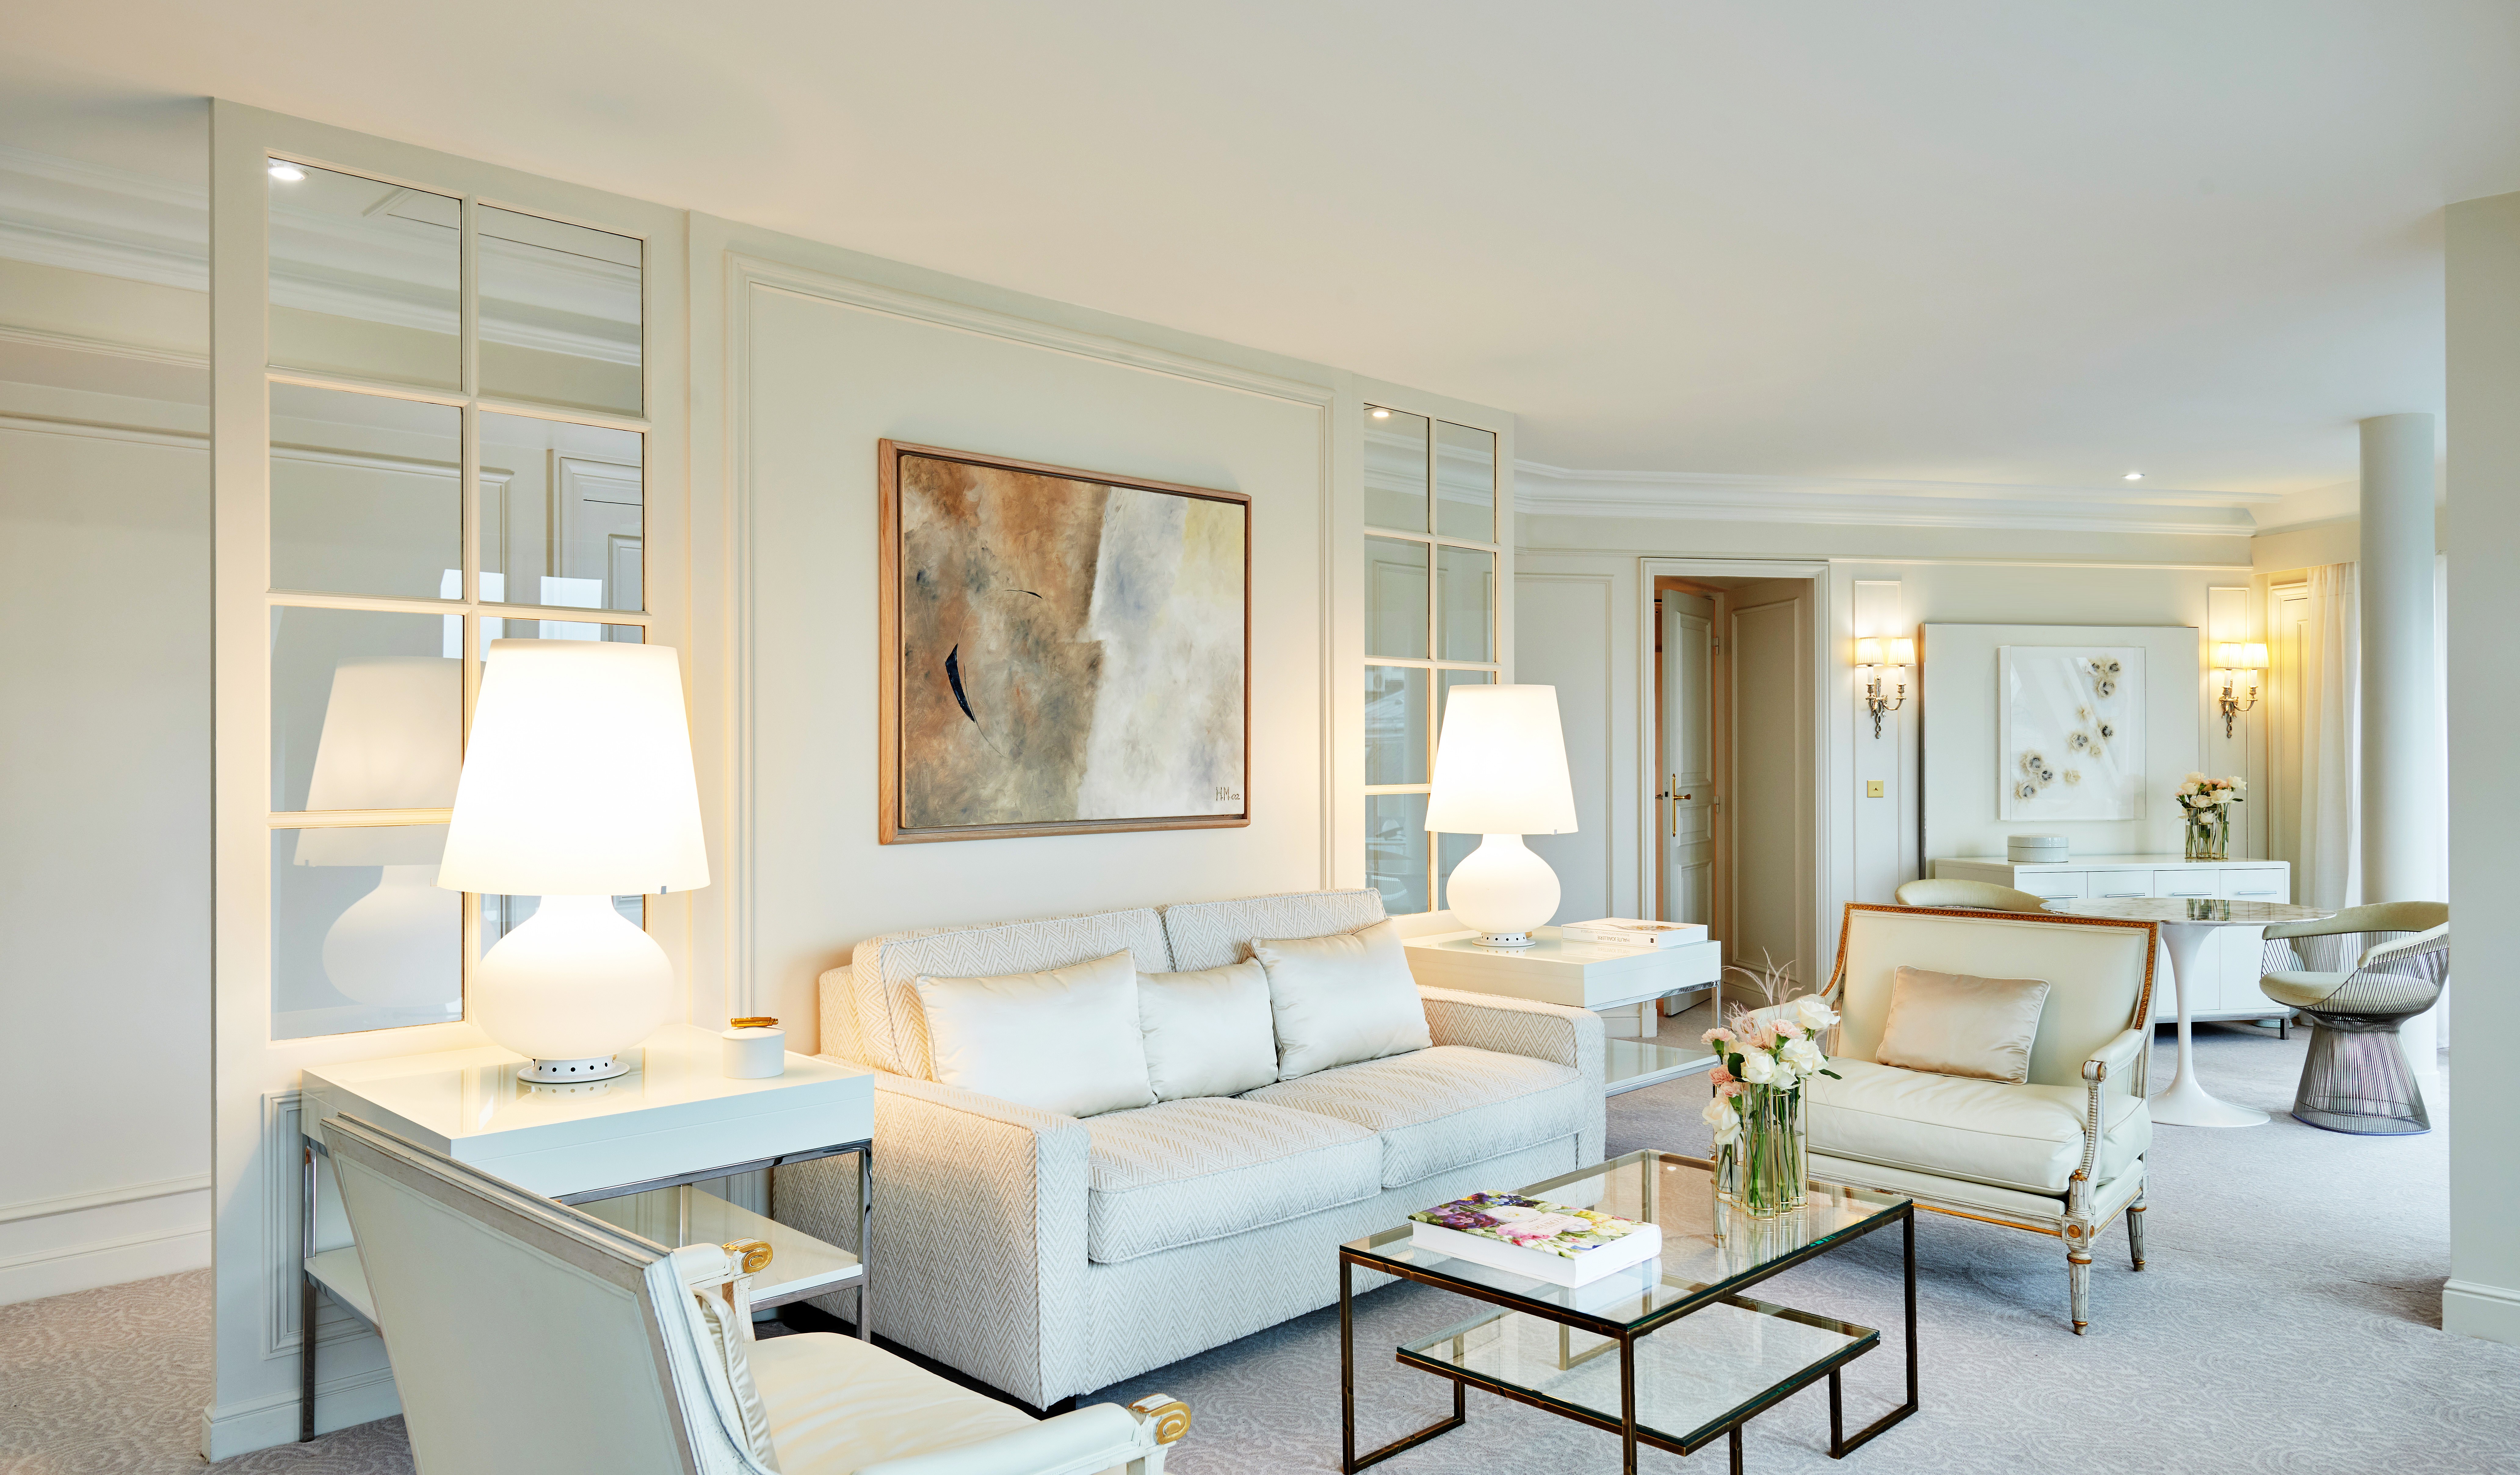 The new Charles Garnier Suite at InterContinental Paris Le Grand is bathed in pristine whites. Photos: Eric Cuvillier